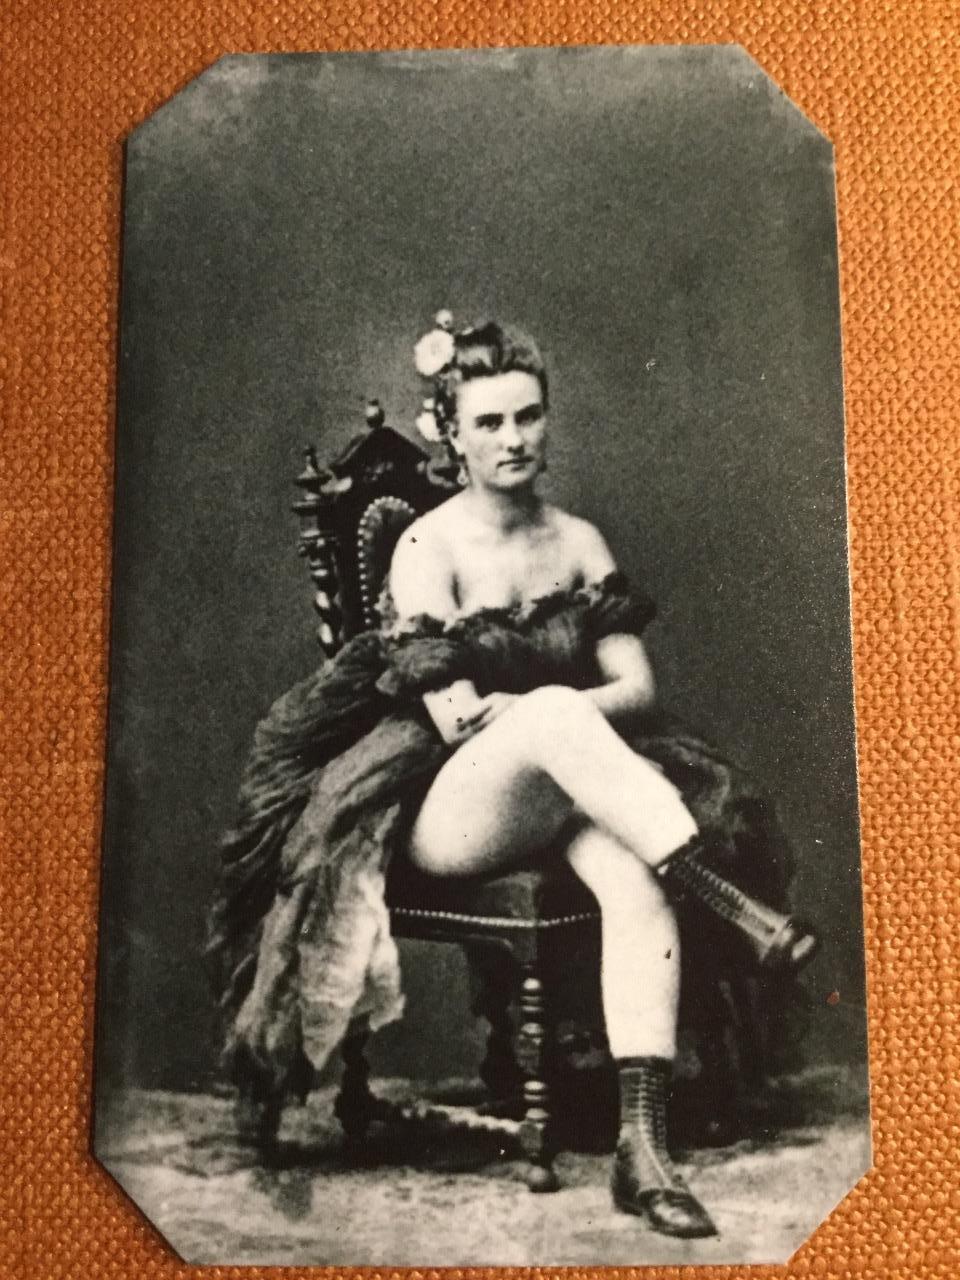 Wild West Soiled Dove prostitute  Historical RP tintype C368RP